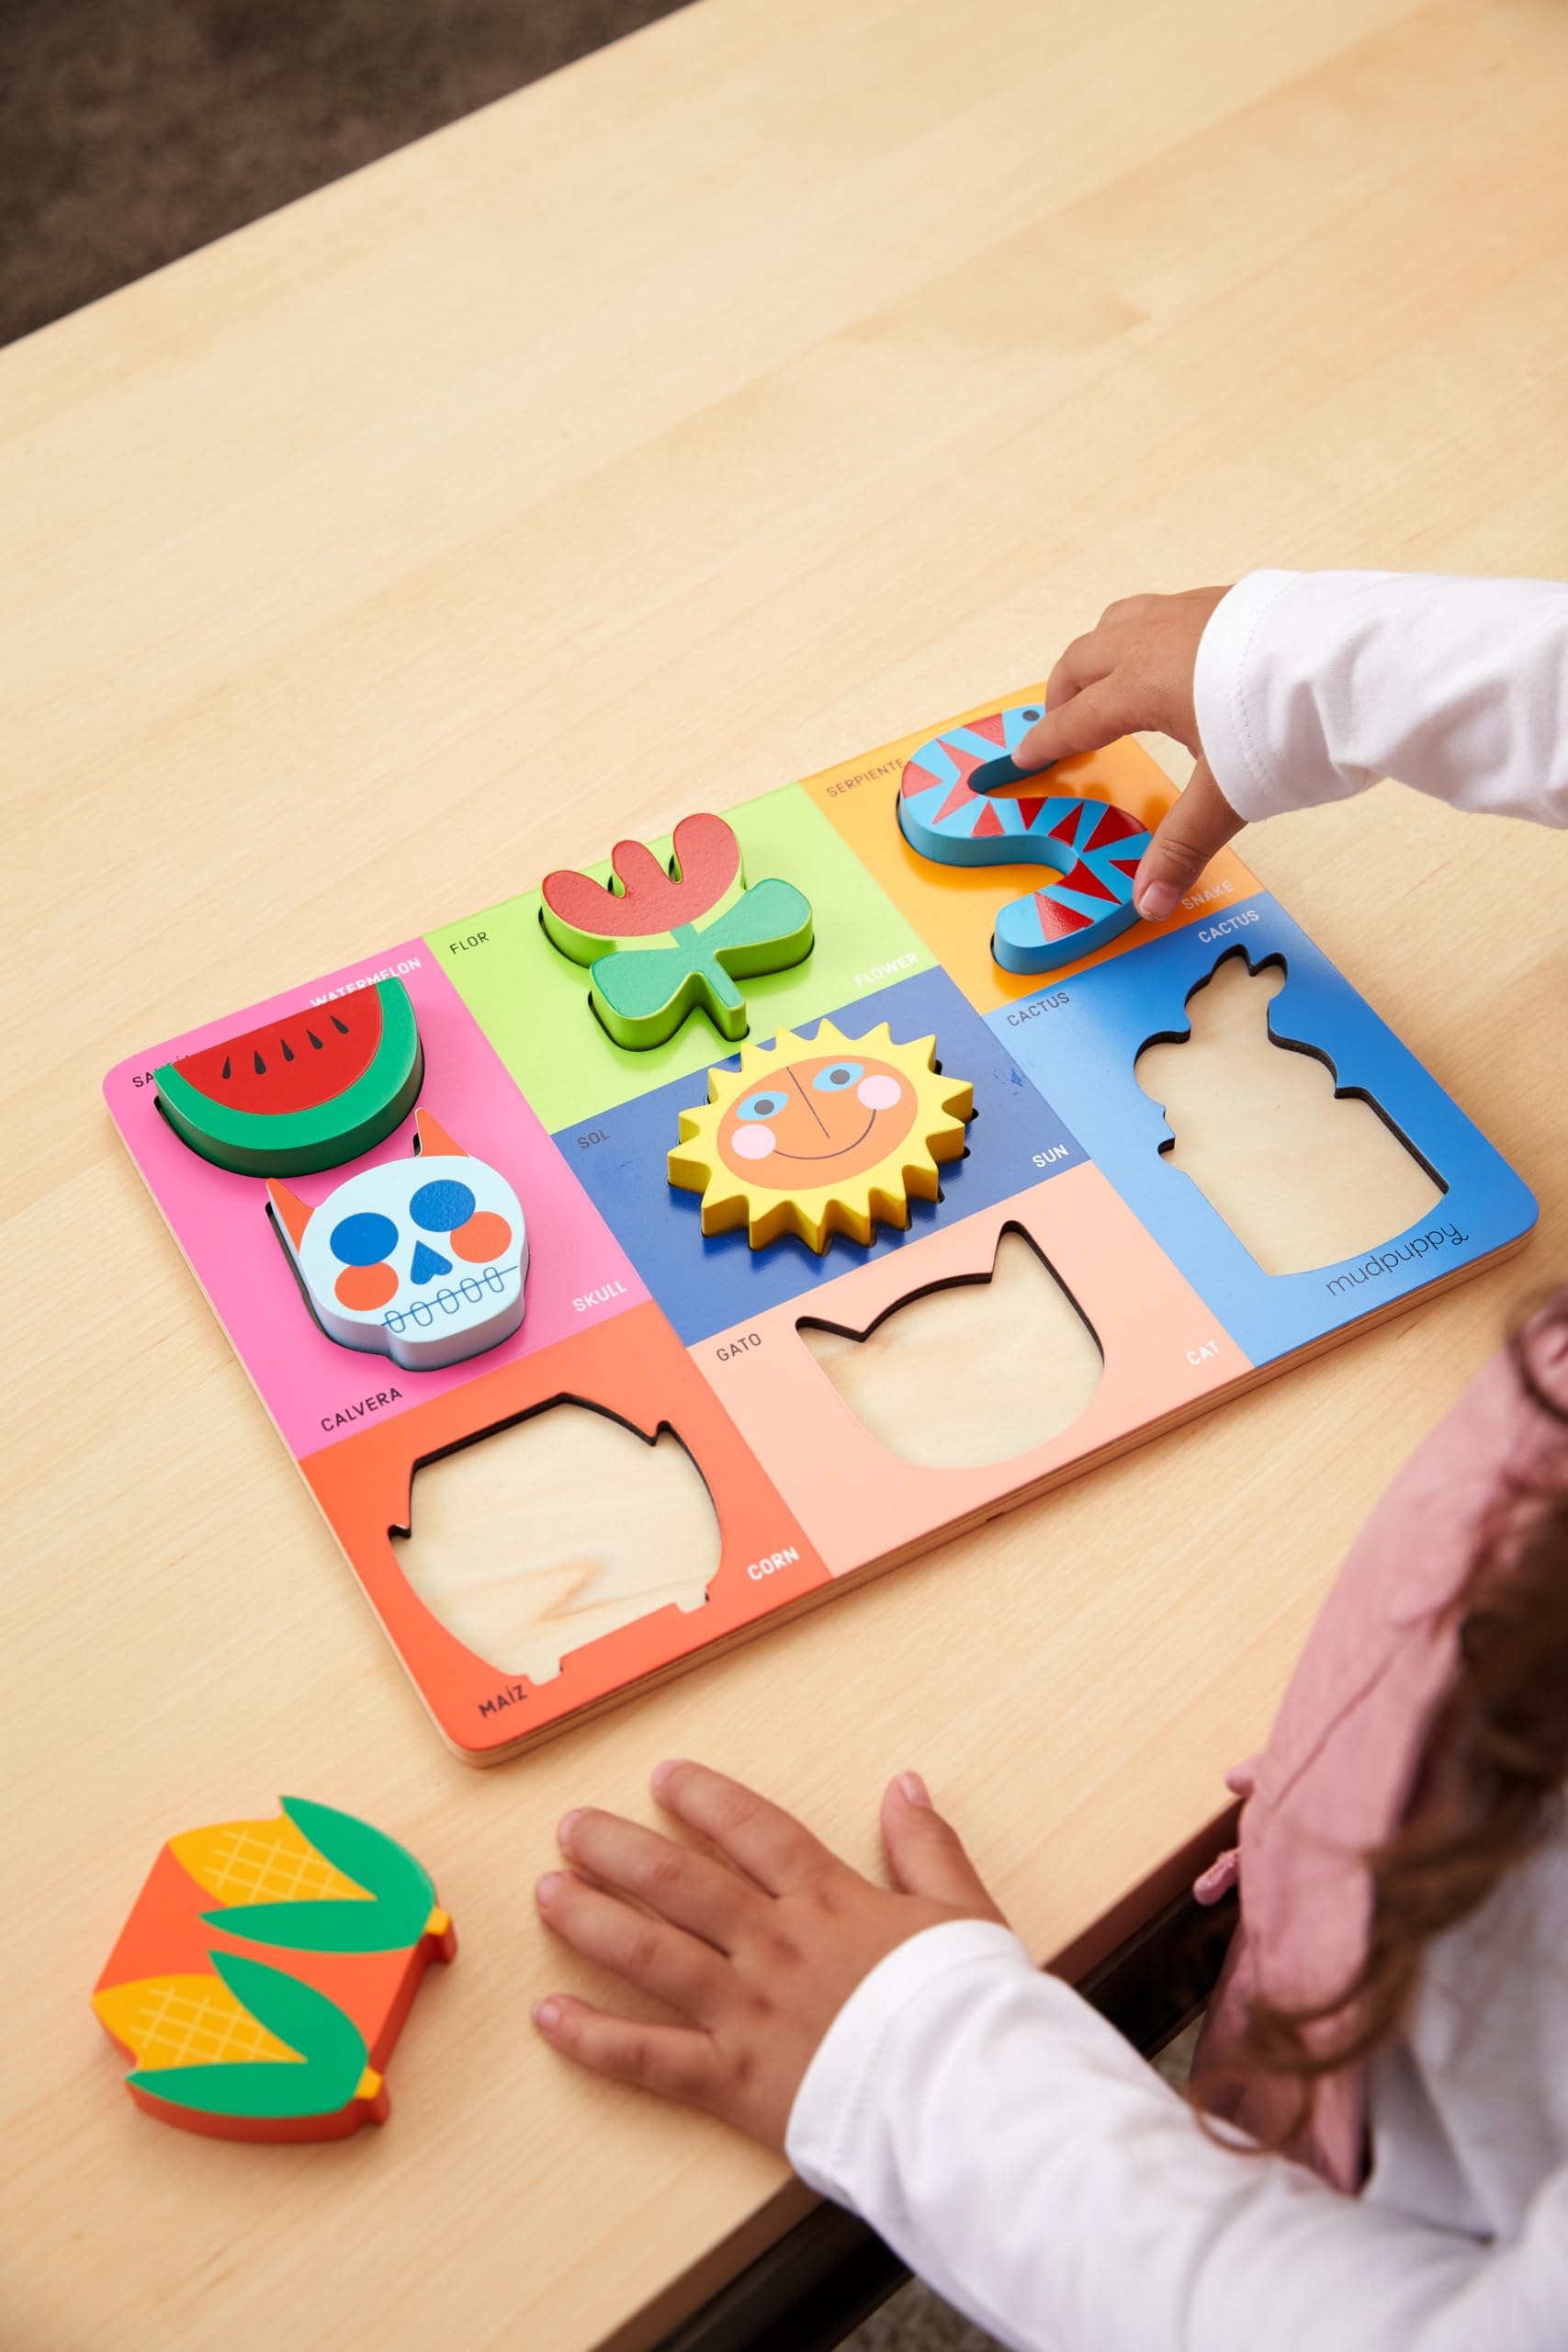 Mudpuppy Mis Amigos - Wooden Tray Puzzle with 8 Shaped Pieces with Spanish-English Labels from Latinx Heritage and Plywood Tray for Babies and Toddlers